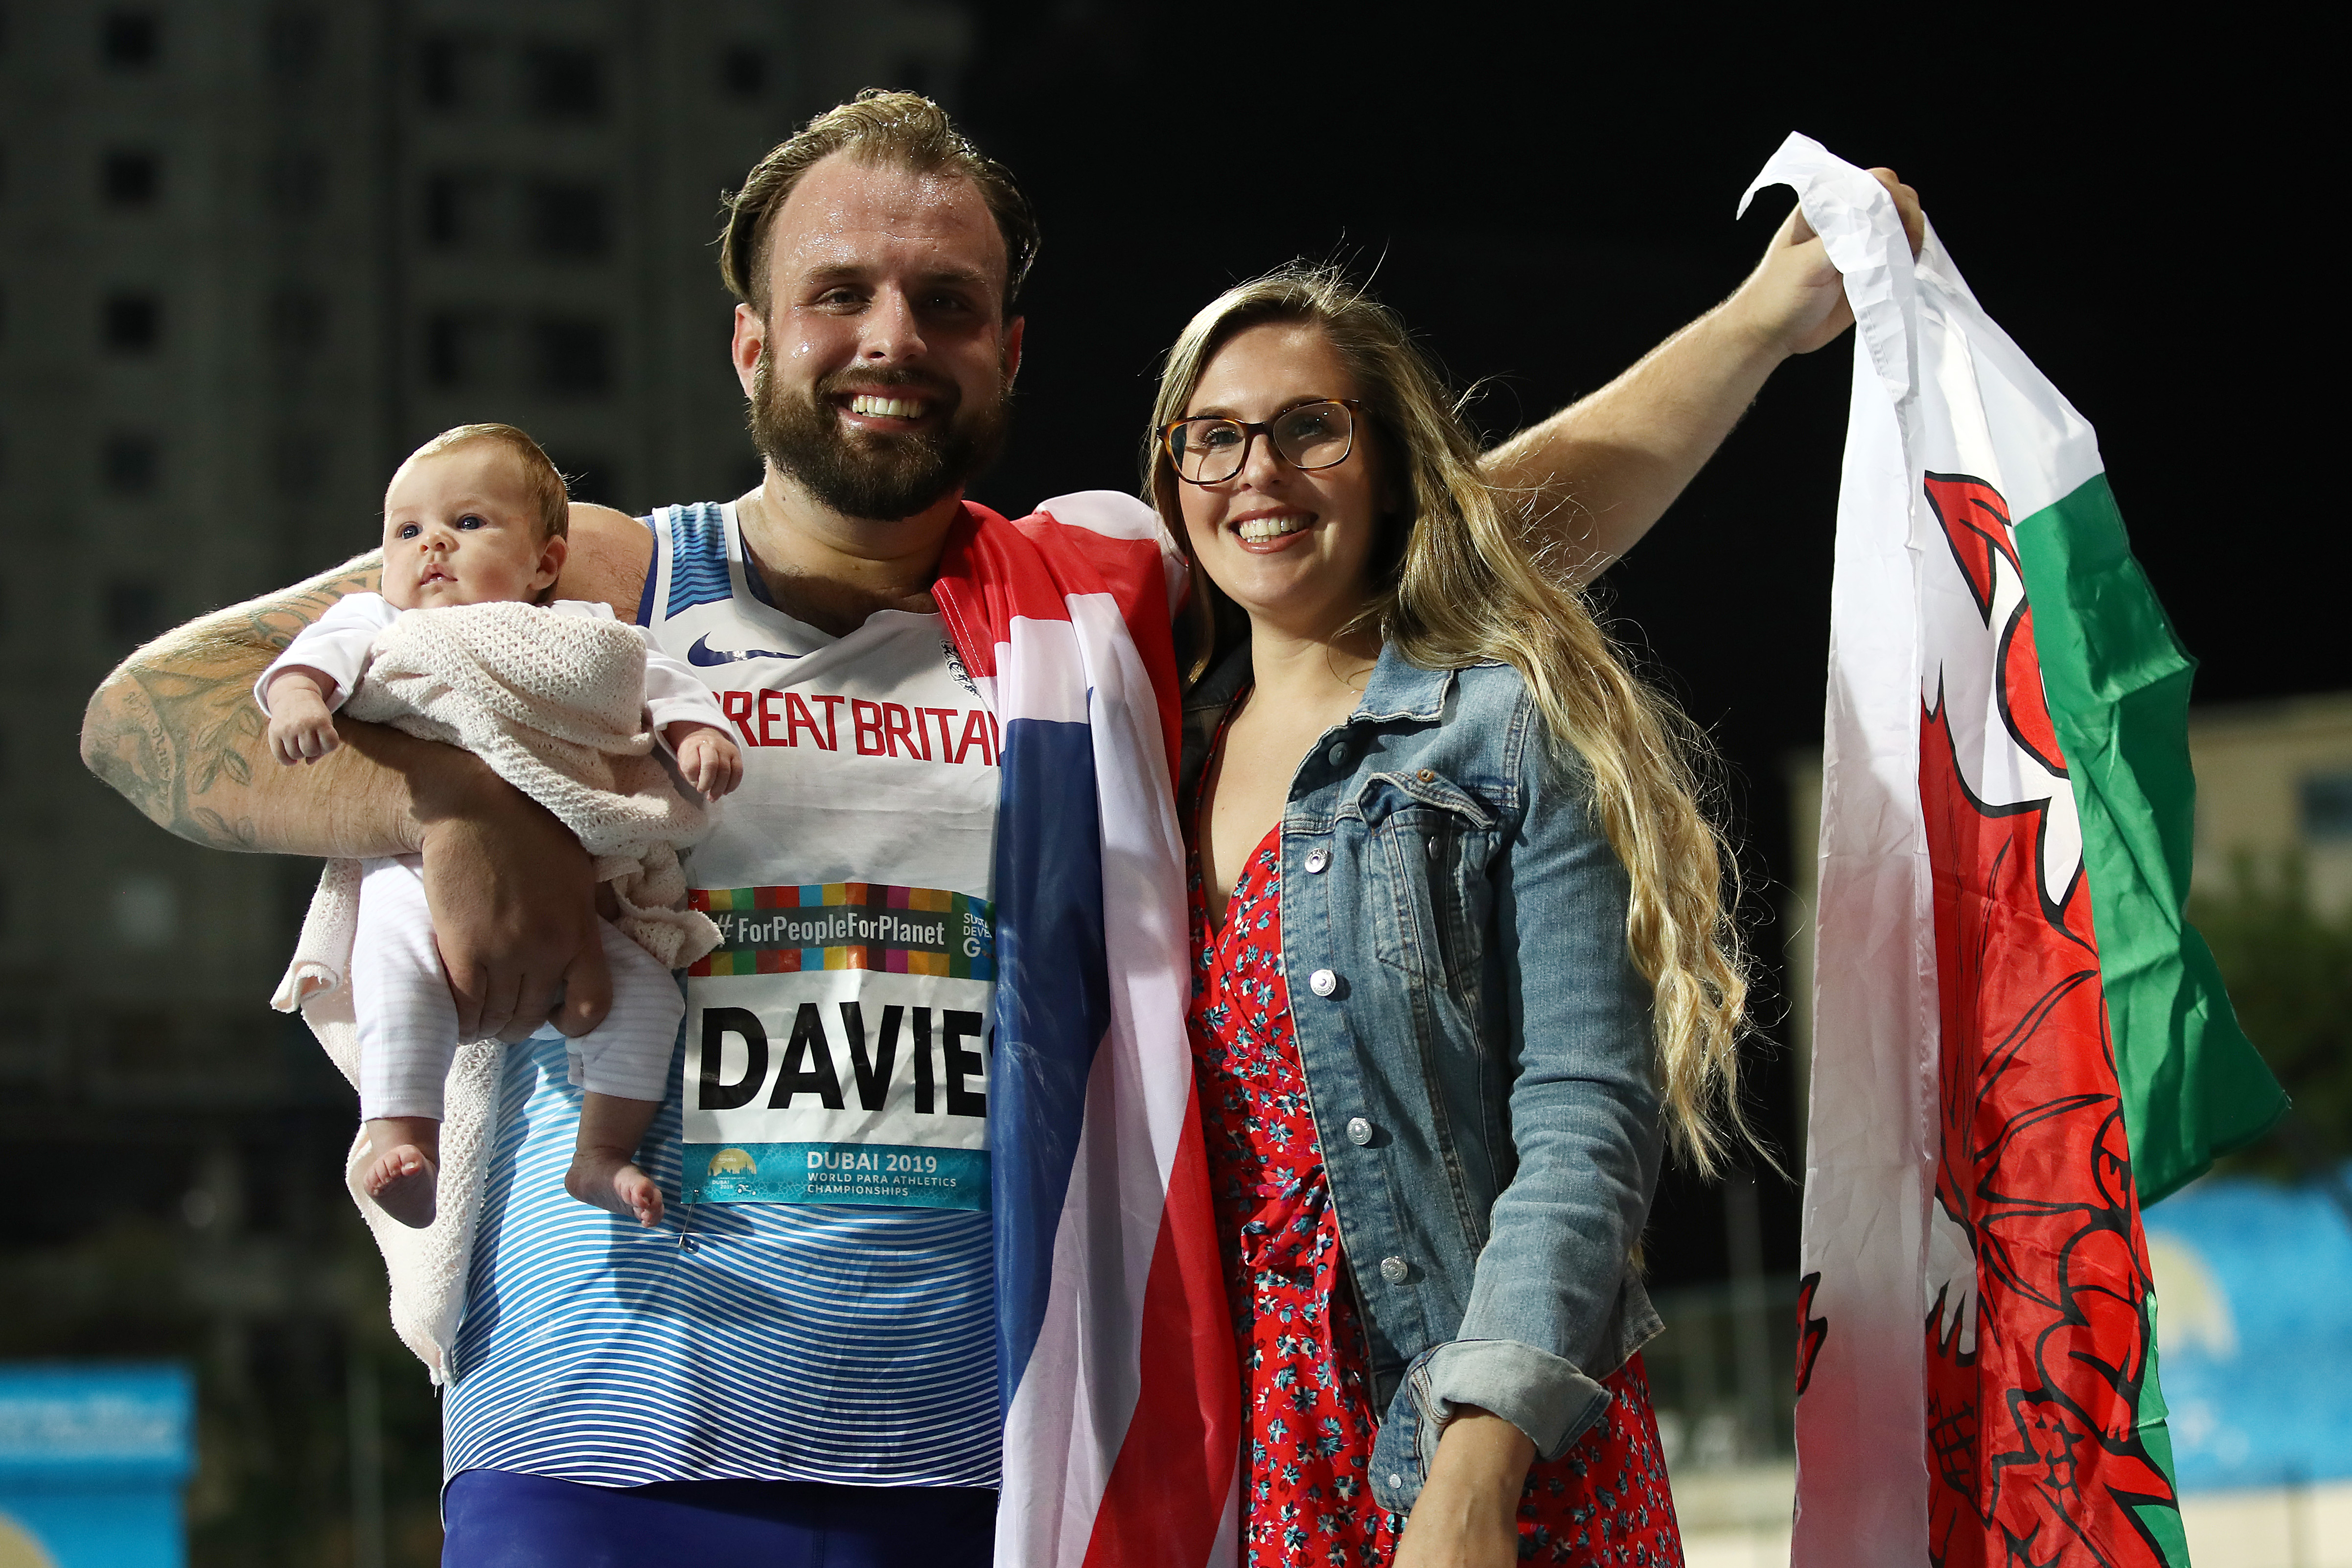 DAVIES AND LYLE STAR IN SUPERB SUNDAY ON GOLDEN NIGHT IN DUBAI